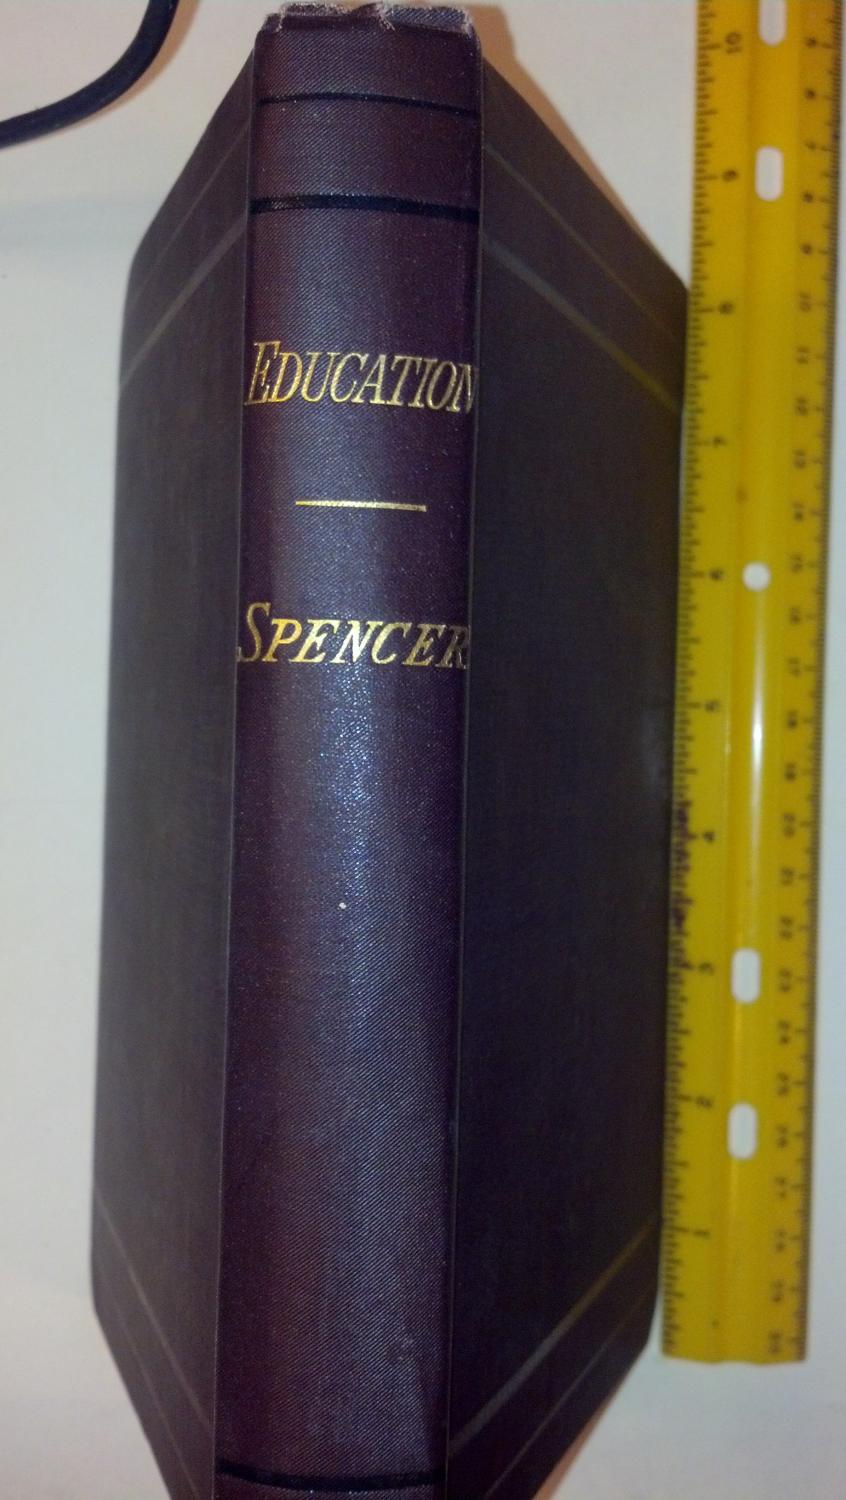 Education book image